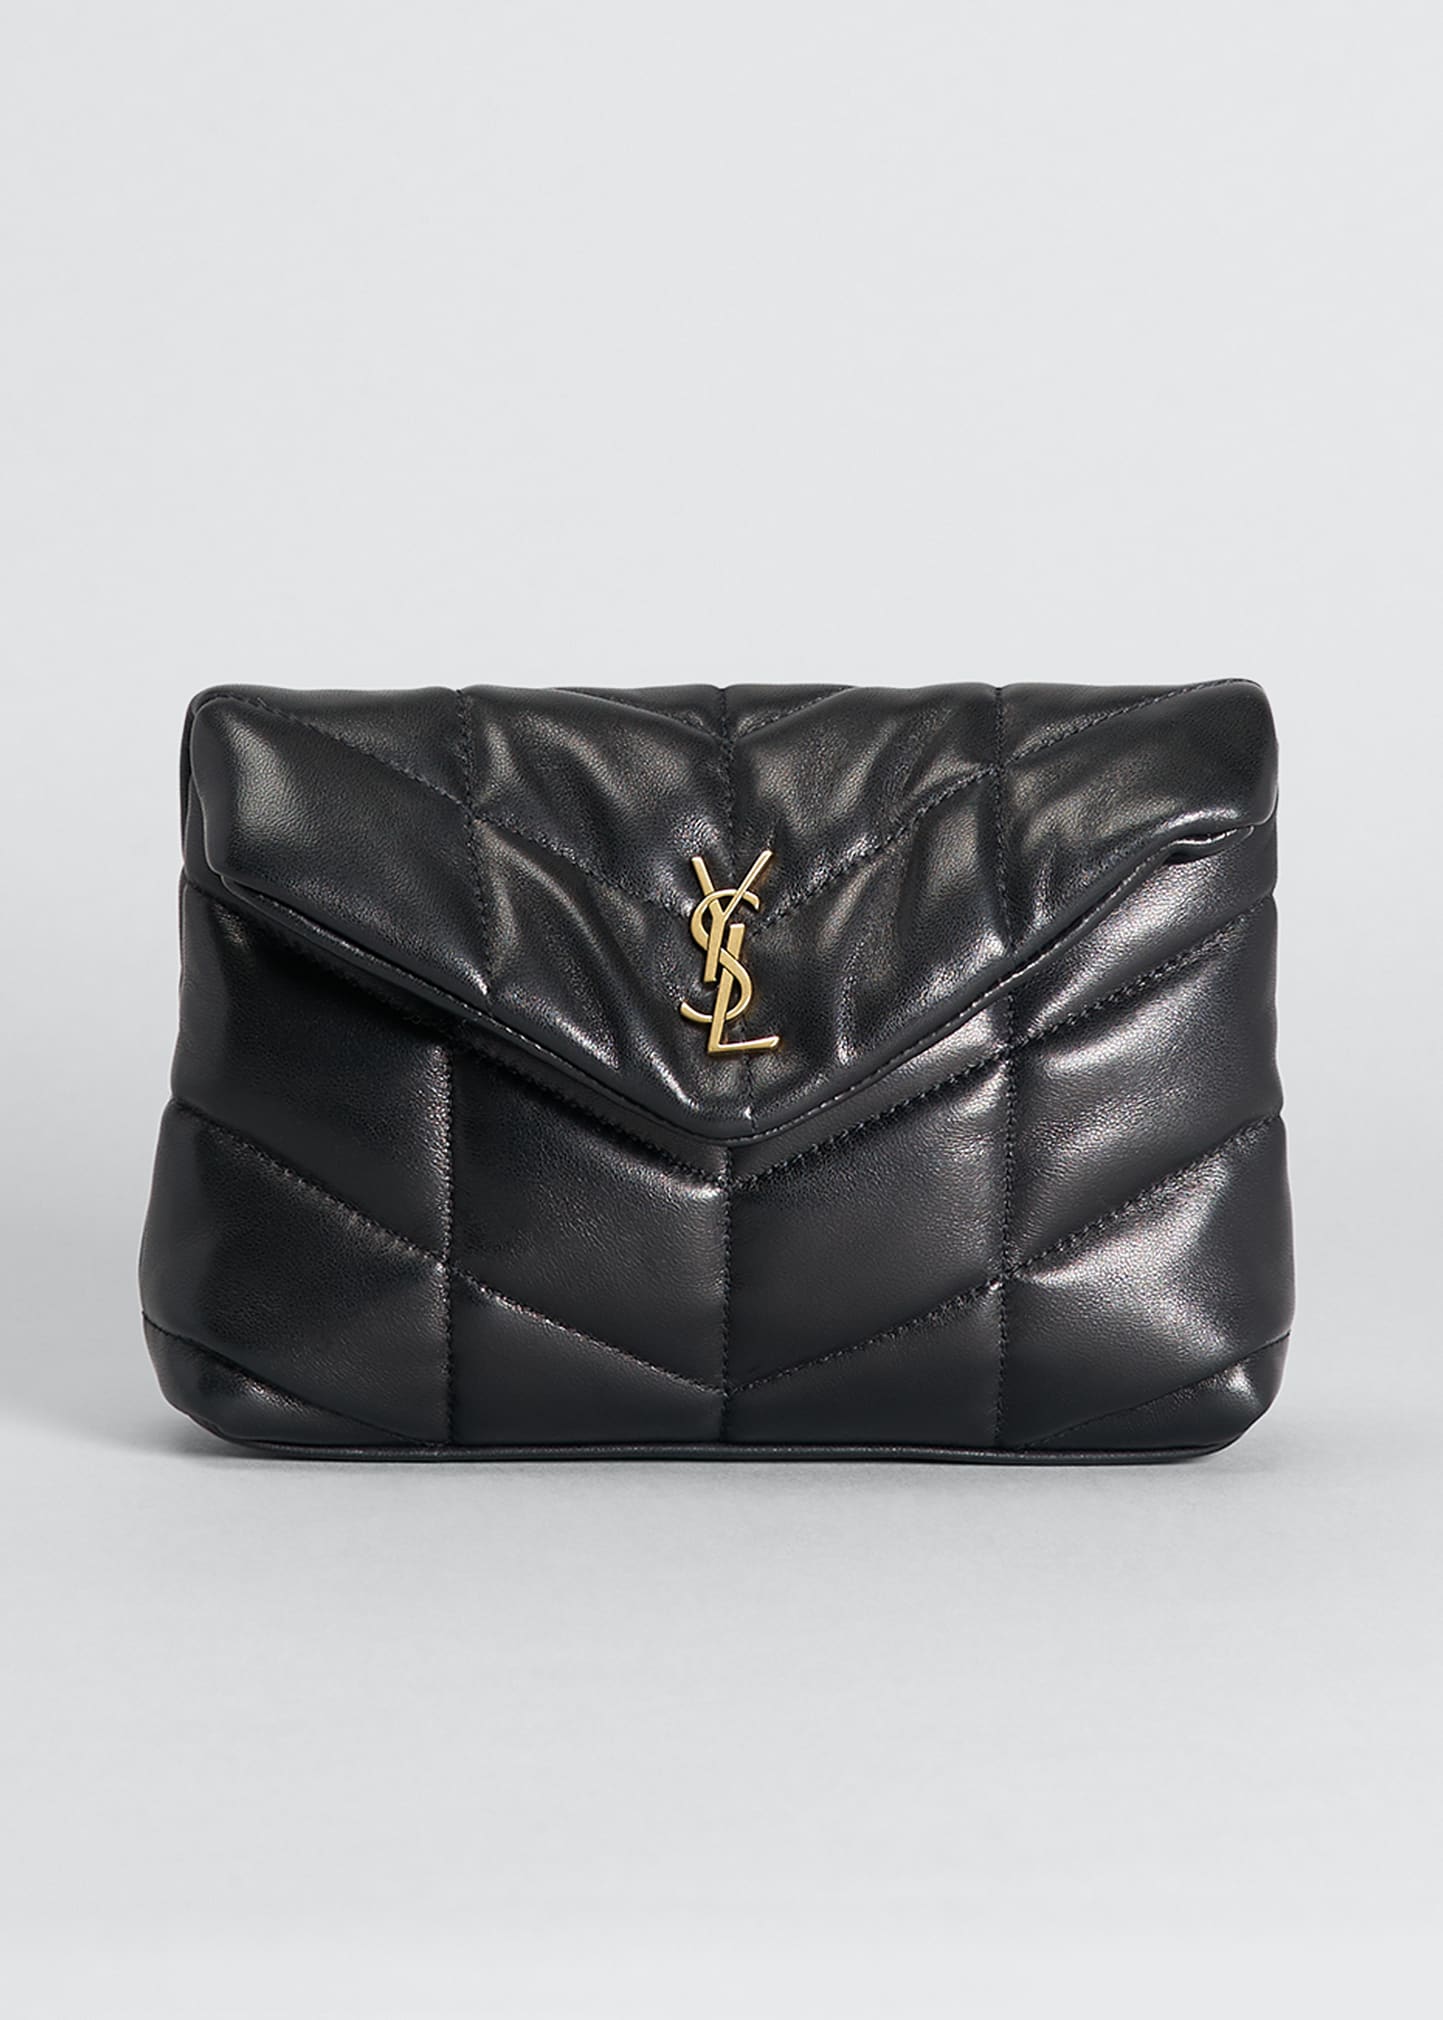 SAINT LAURENT PUFFER SMALL YSL QUILTED POUCH CLUTCH BAG